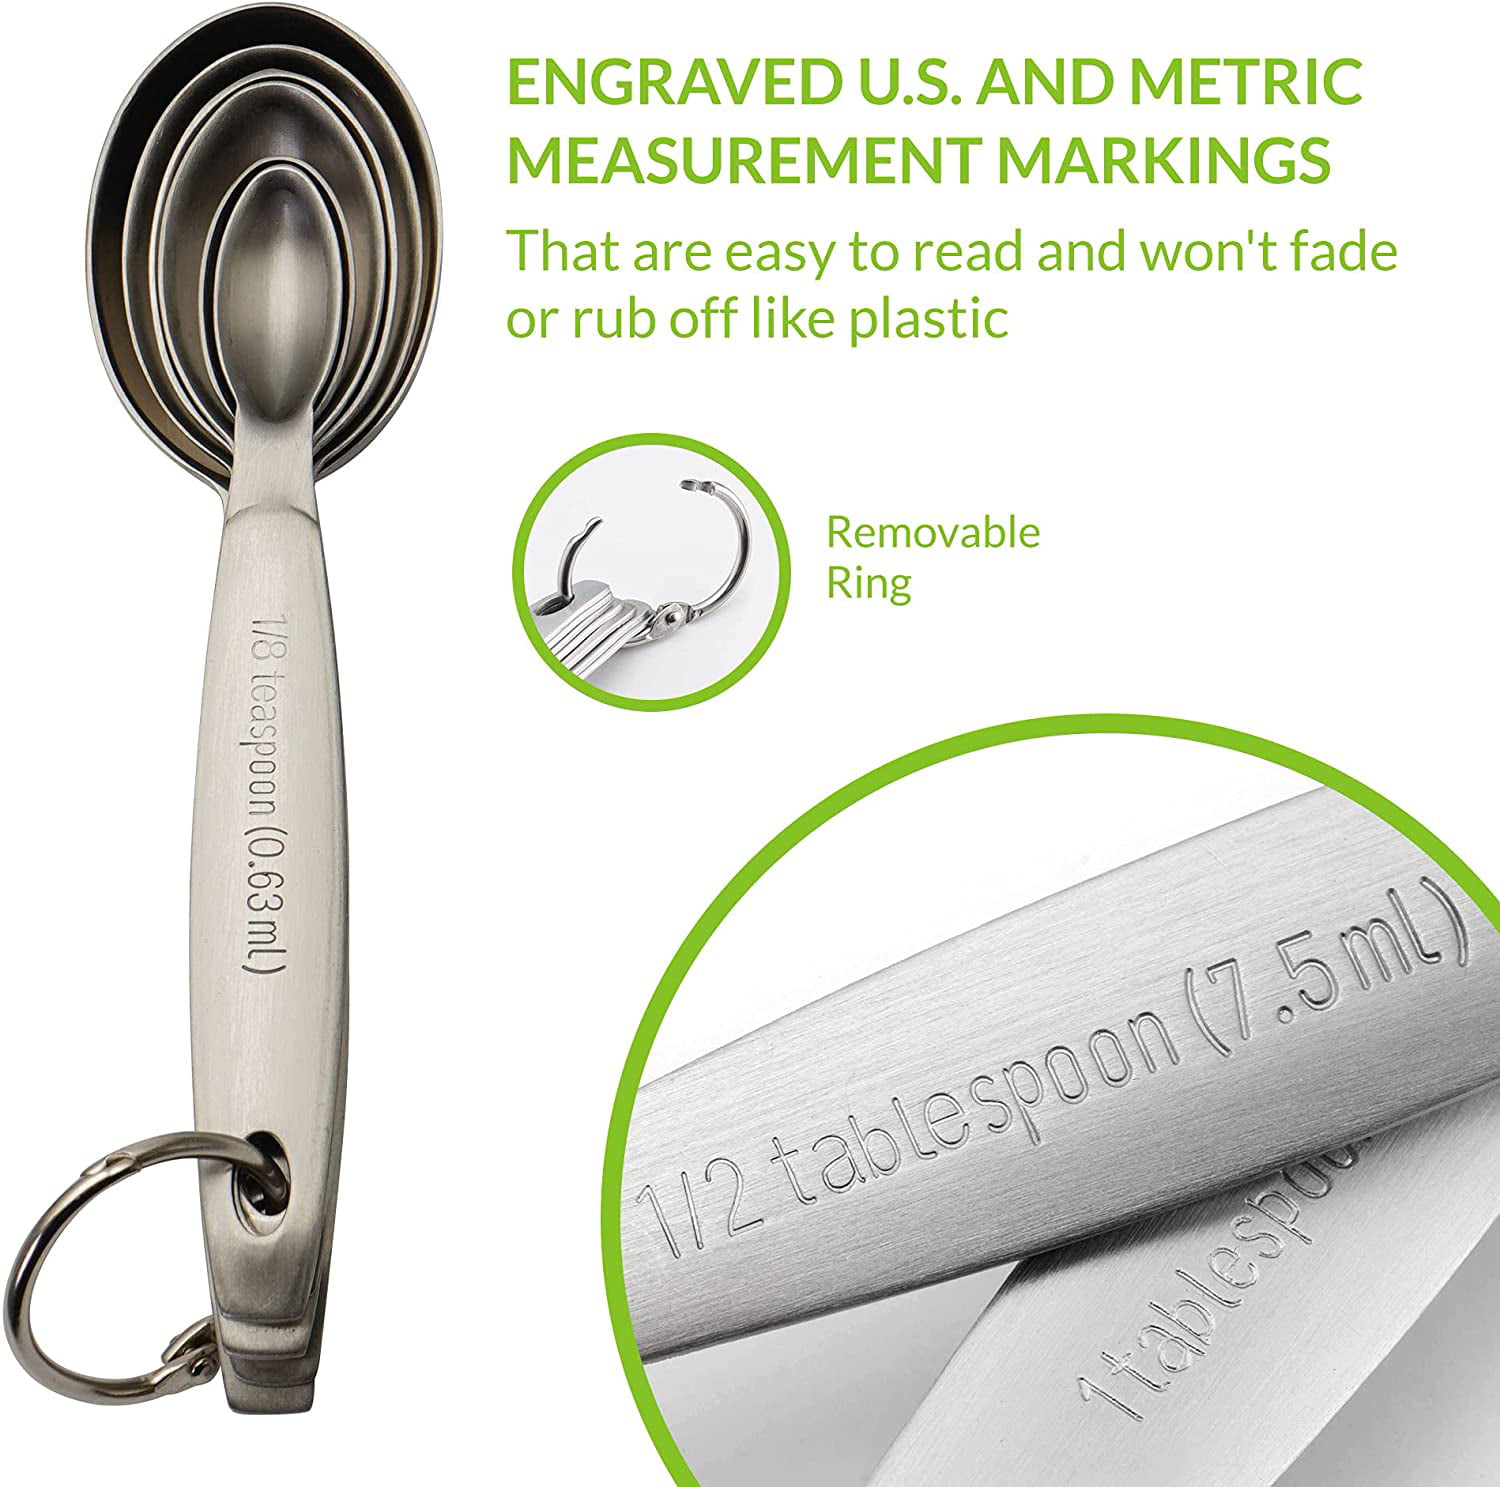 Oval Deluxe Measuring Spoon 4 pcs set stainless steel